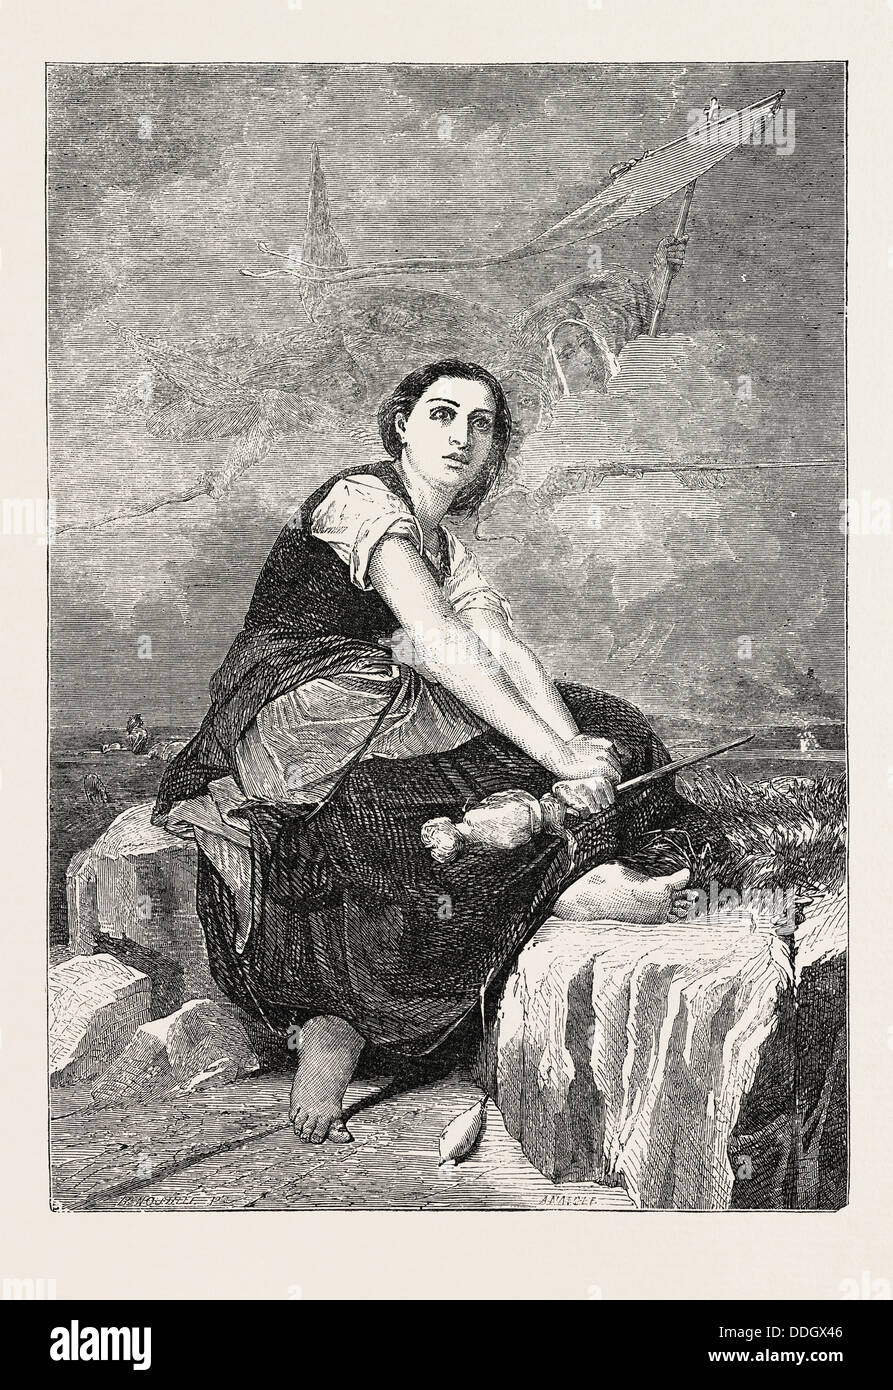 JOAN OF ARC BY M. BENOUVILLE, 1859 Stock Photo